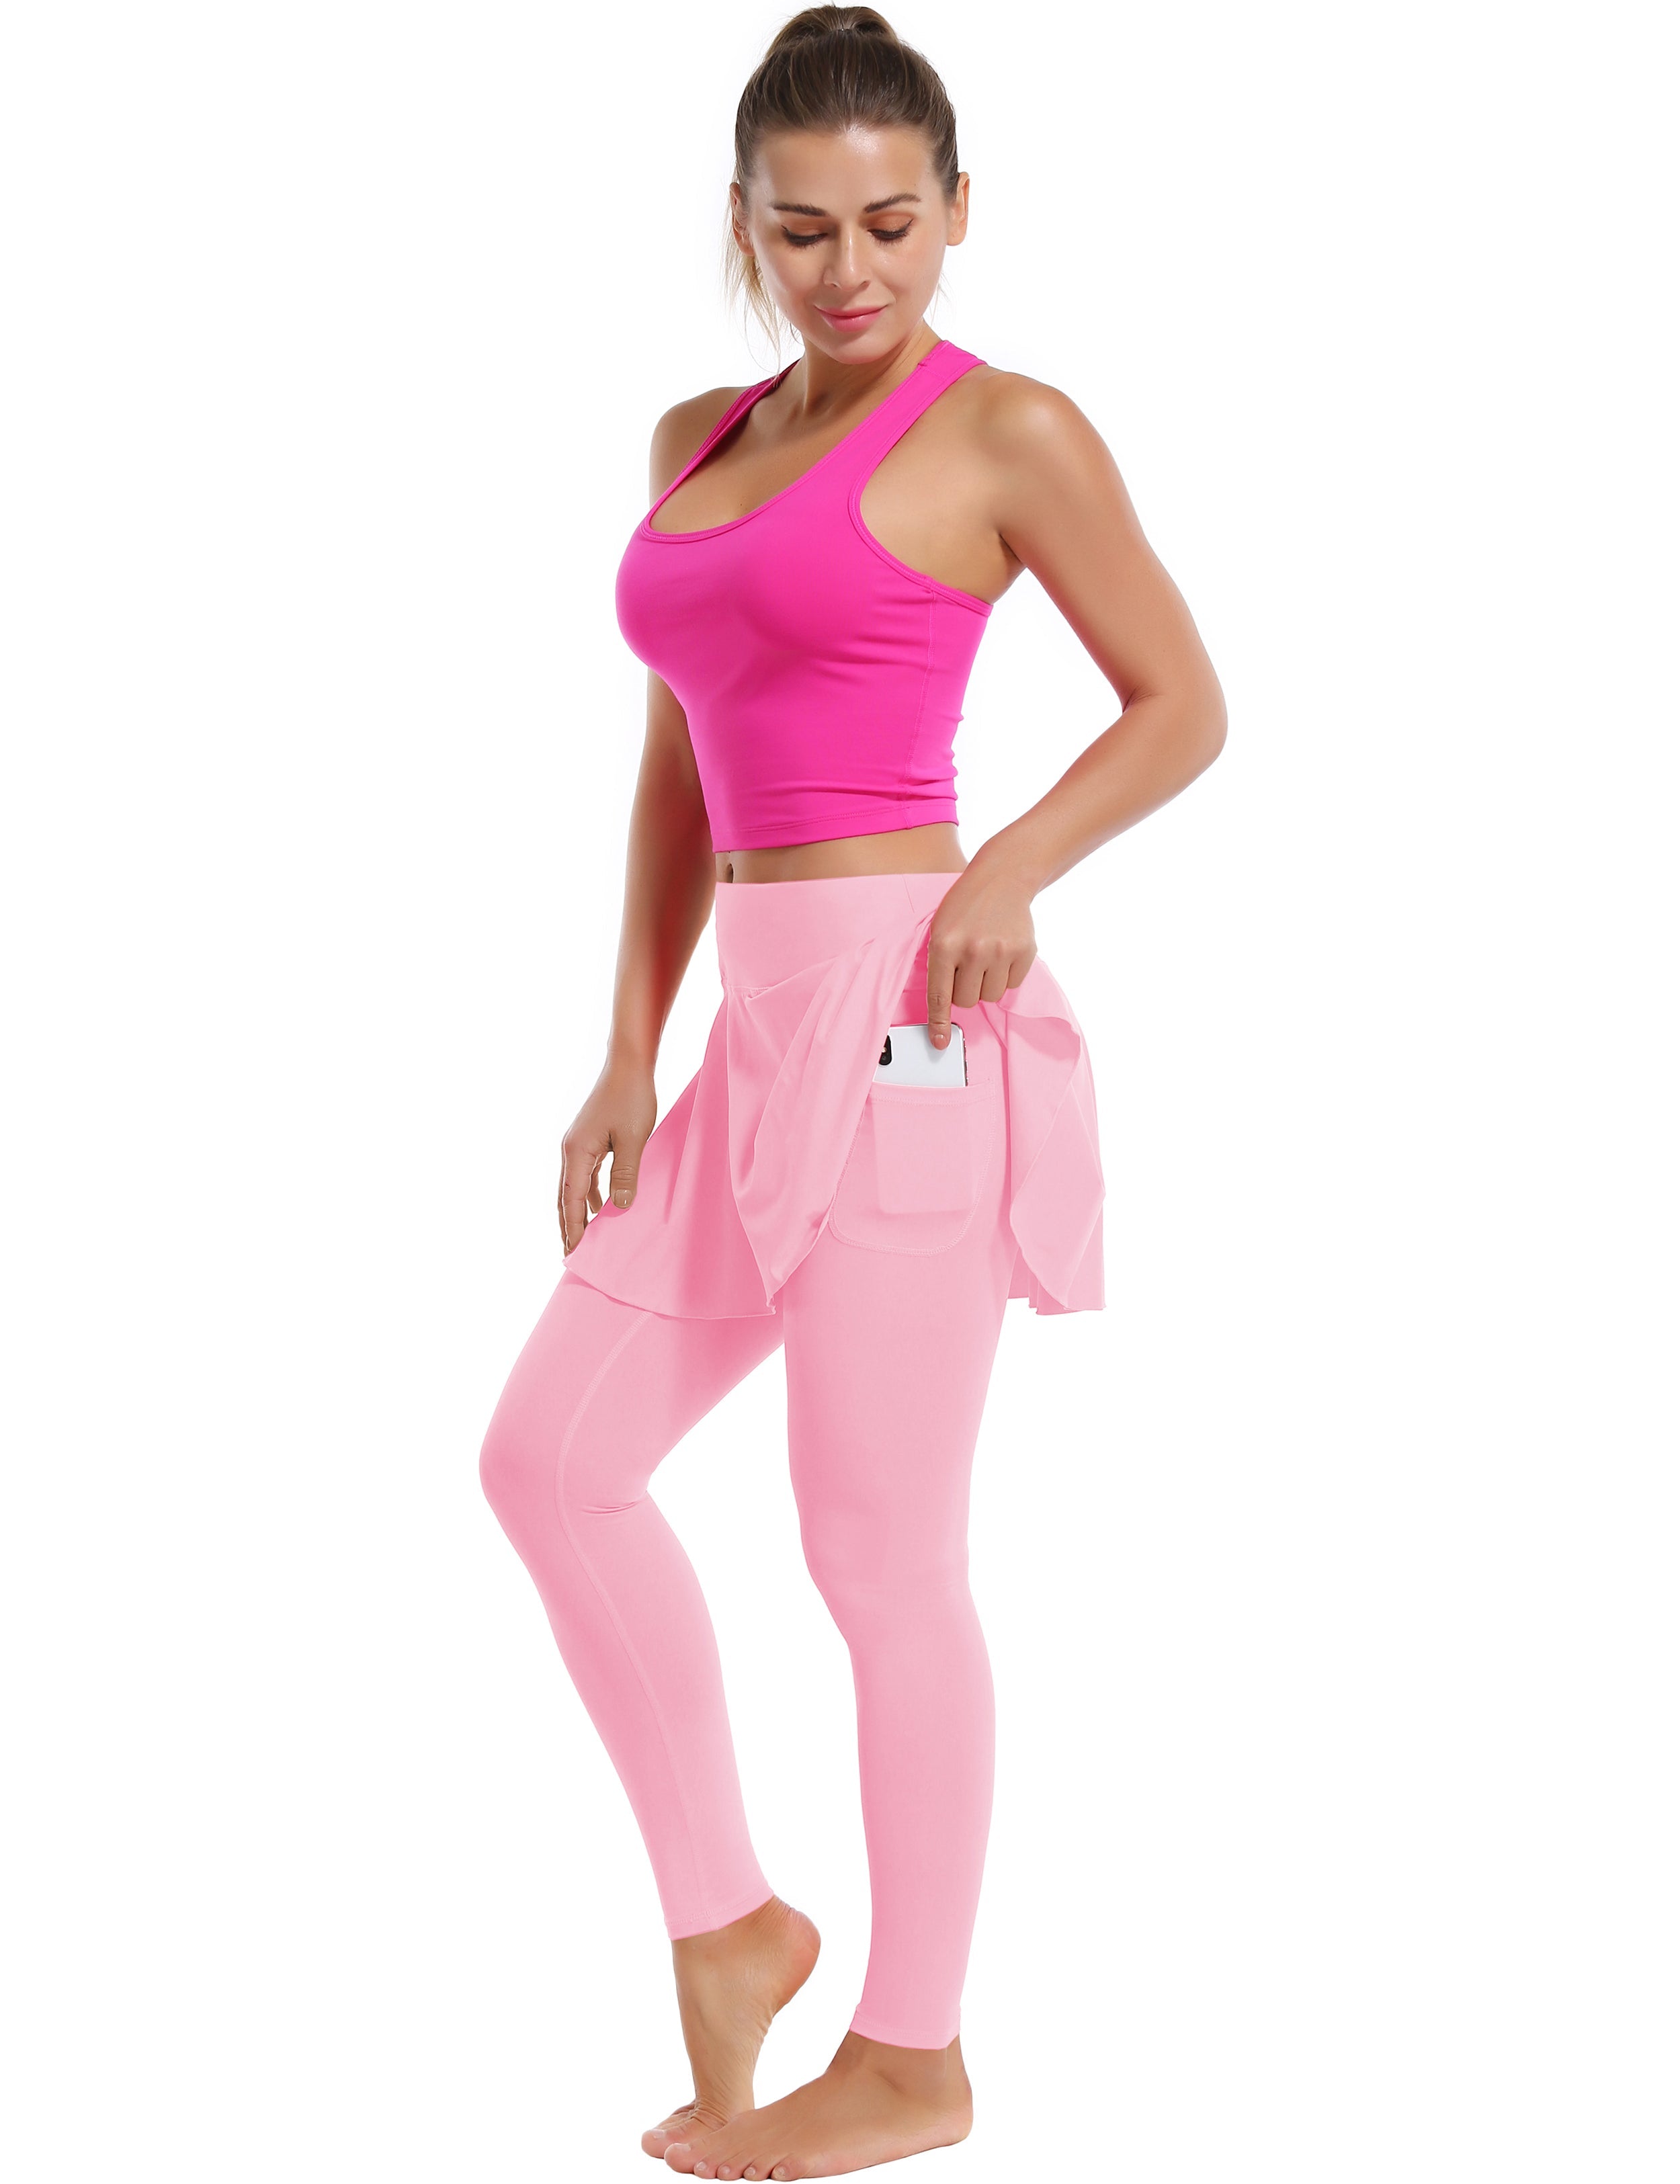 Athletic Tennis Golf Skort with Pocket Shorts lightpink 80%Nylon/20%Spandex UPF 50+ sun protection Elastic closure Lightweight, Wrinkle Moisture wicking Quick drying Secure & comfortable two layer Hidden pocket